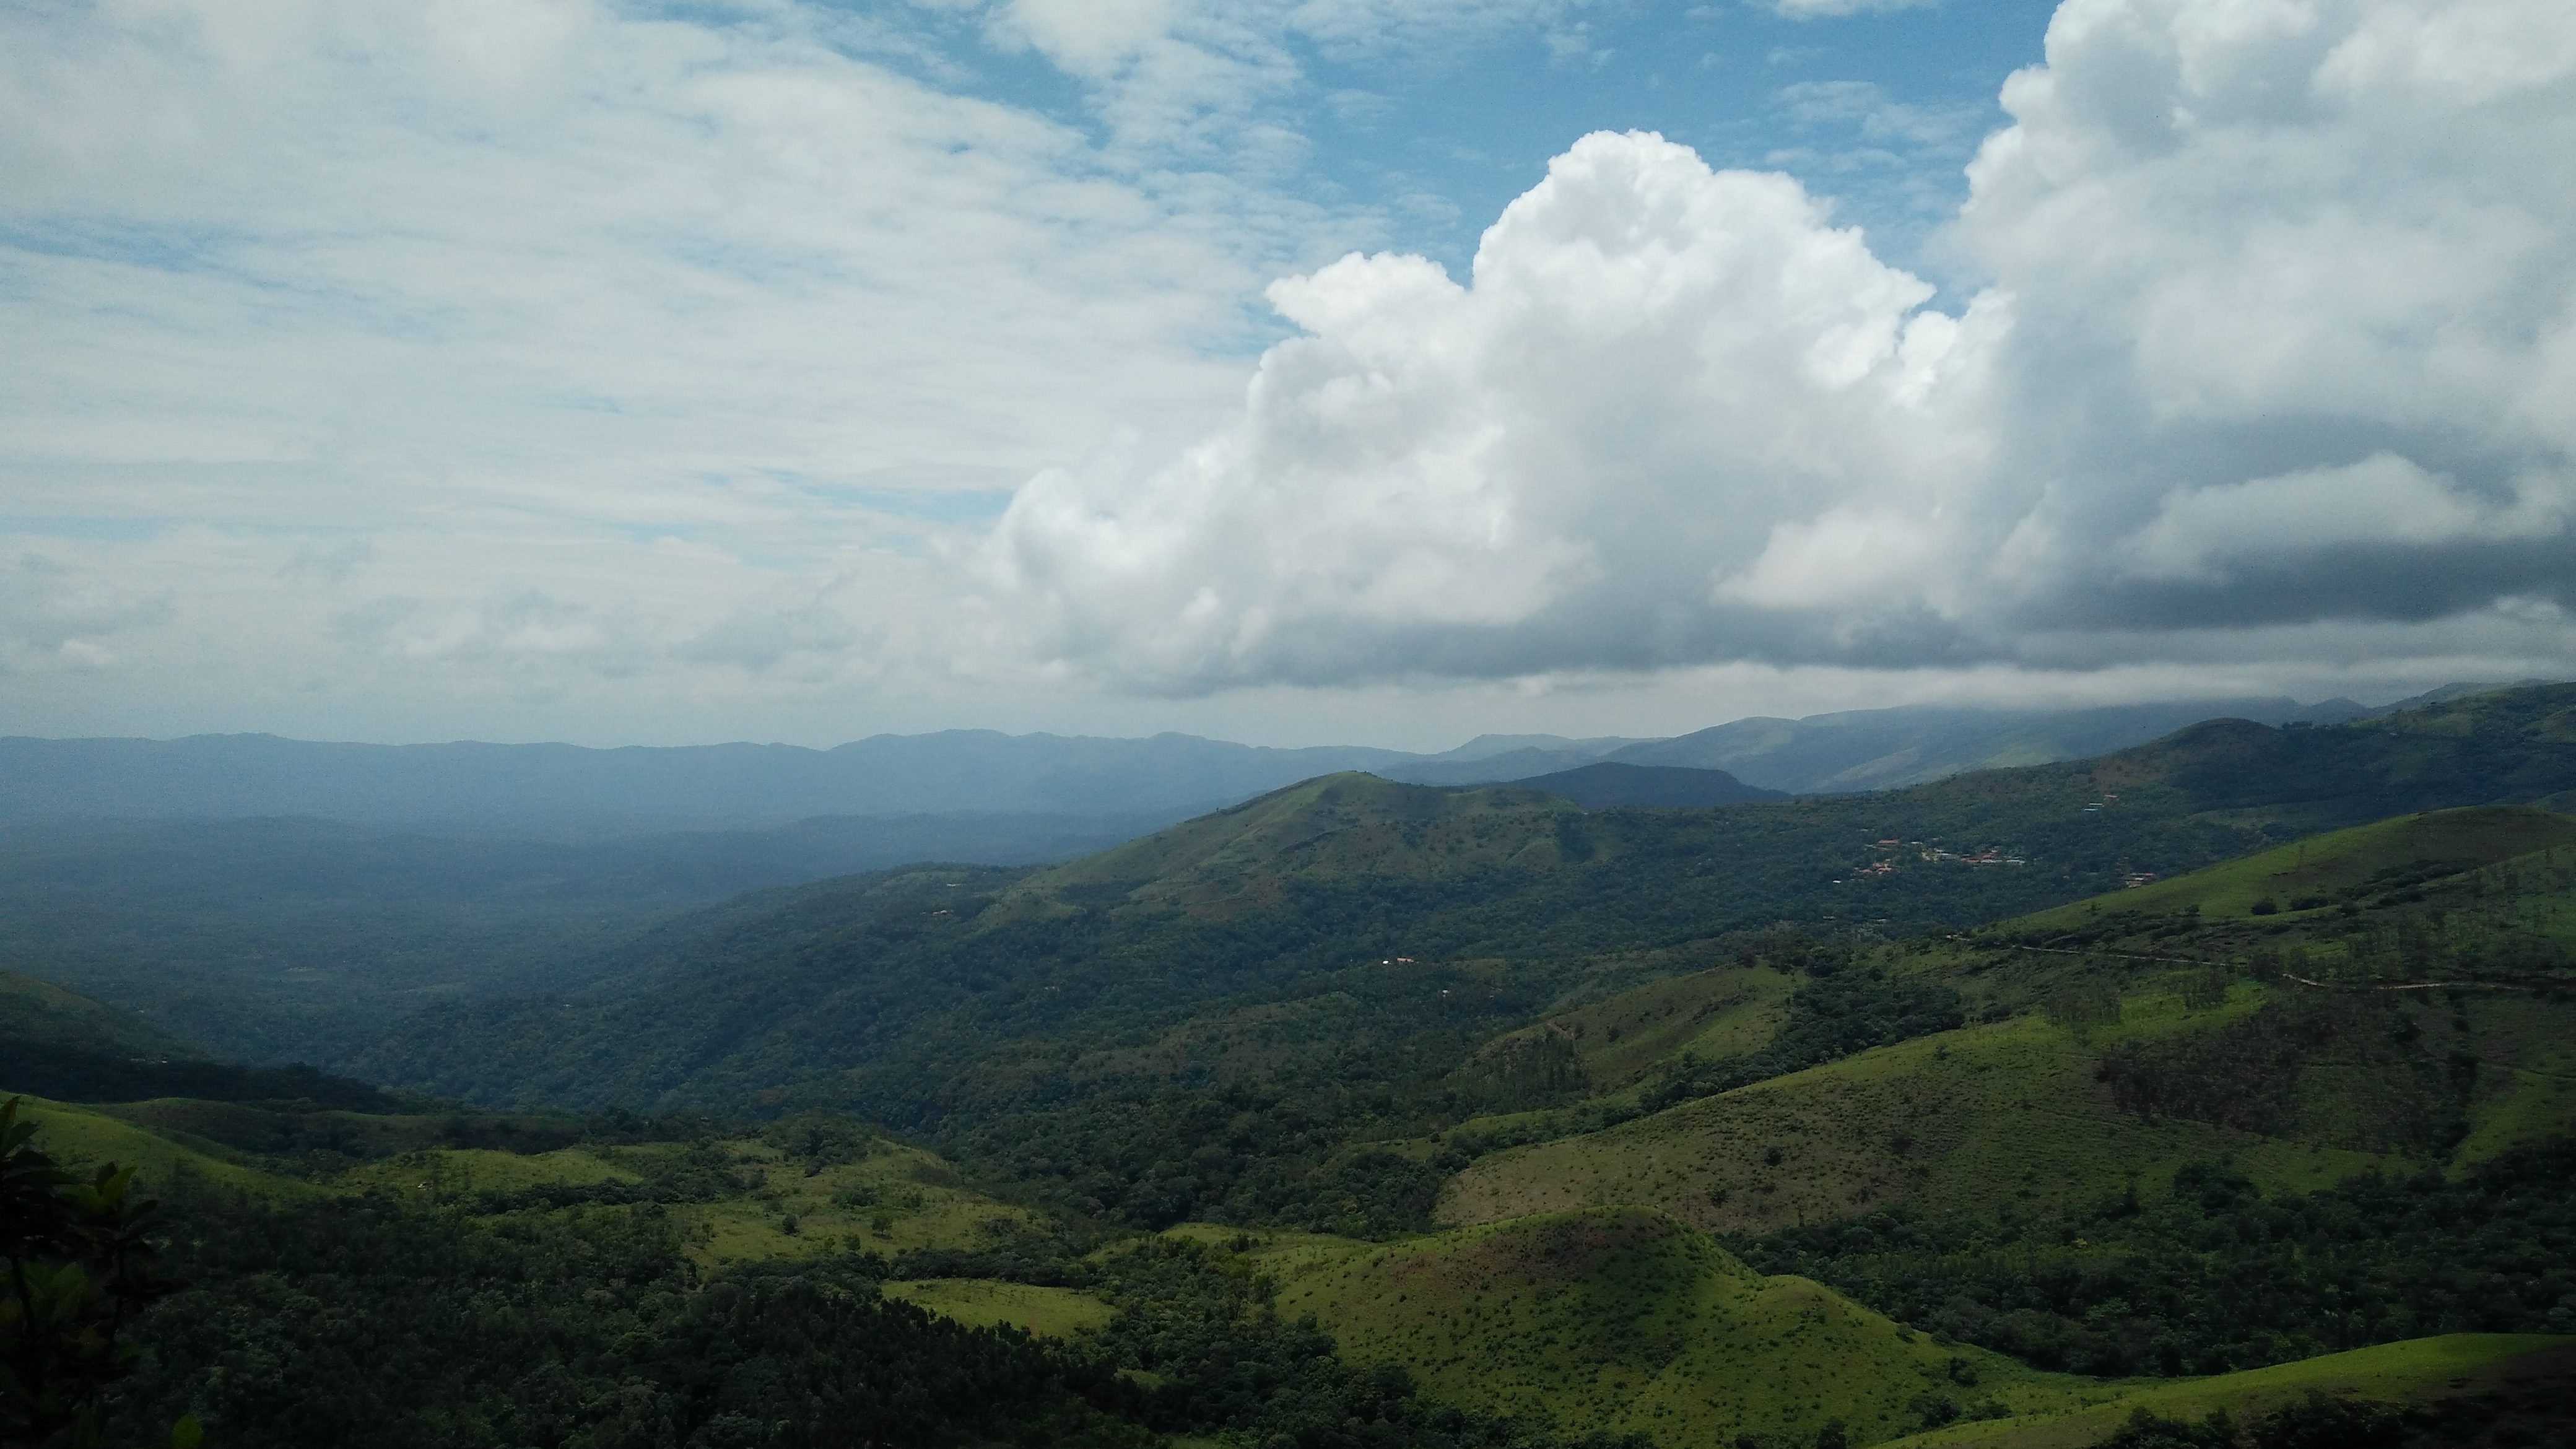 Chikmagalur is a perfect weekend getaway when visiting hill stations in India